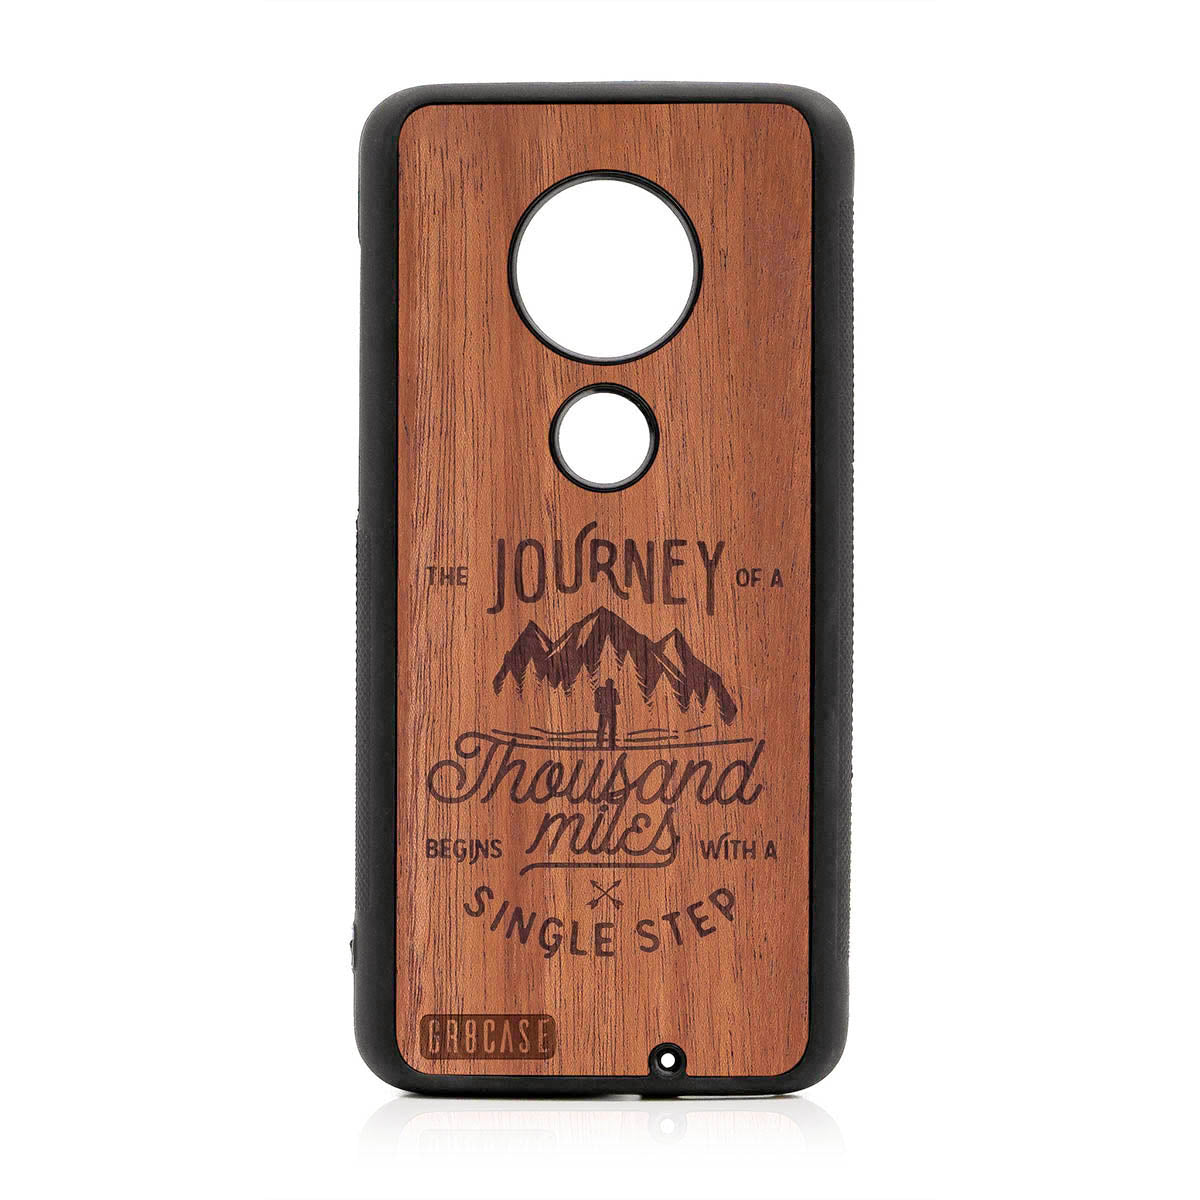 The Journey Of A Thousand Miles Begins With A Single Step Design Wood Case For Moto G7 Plus